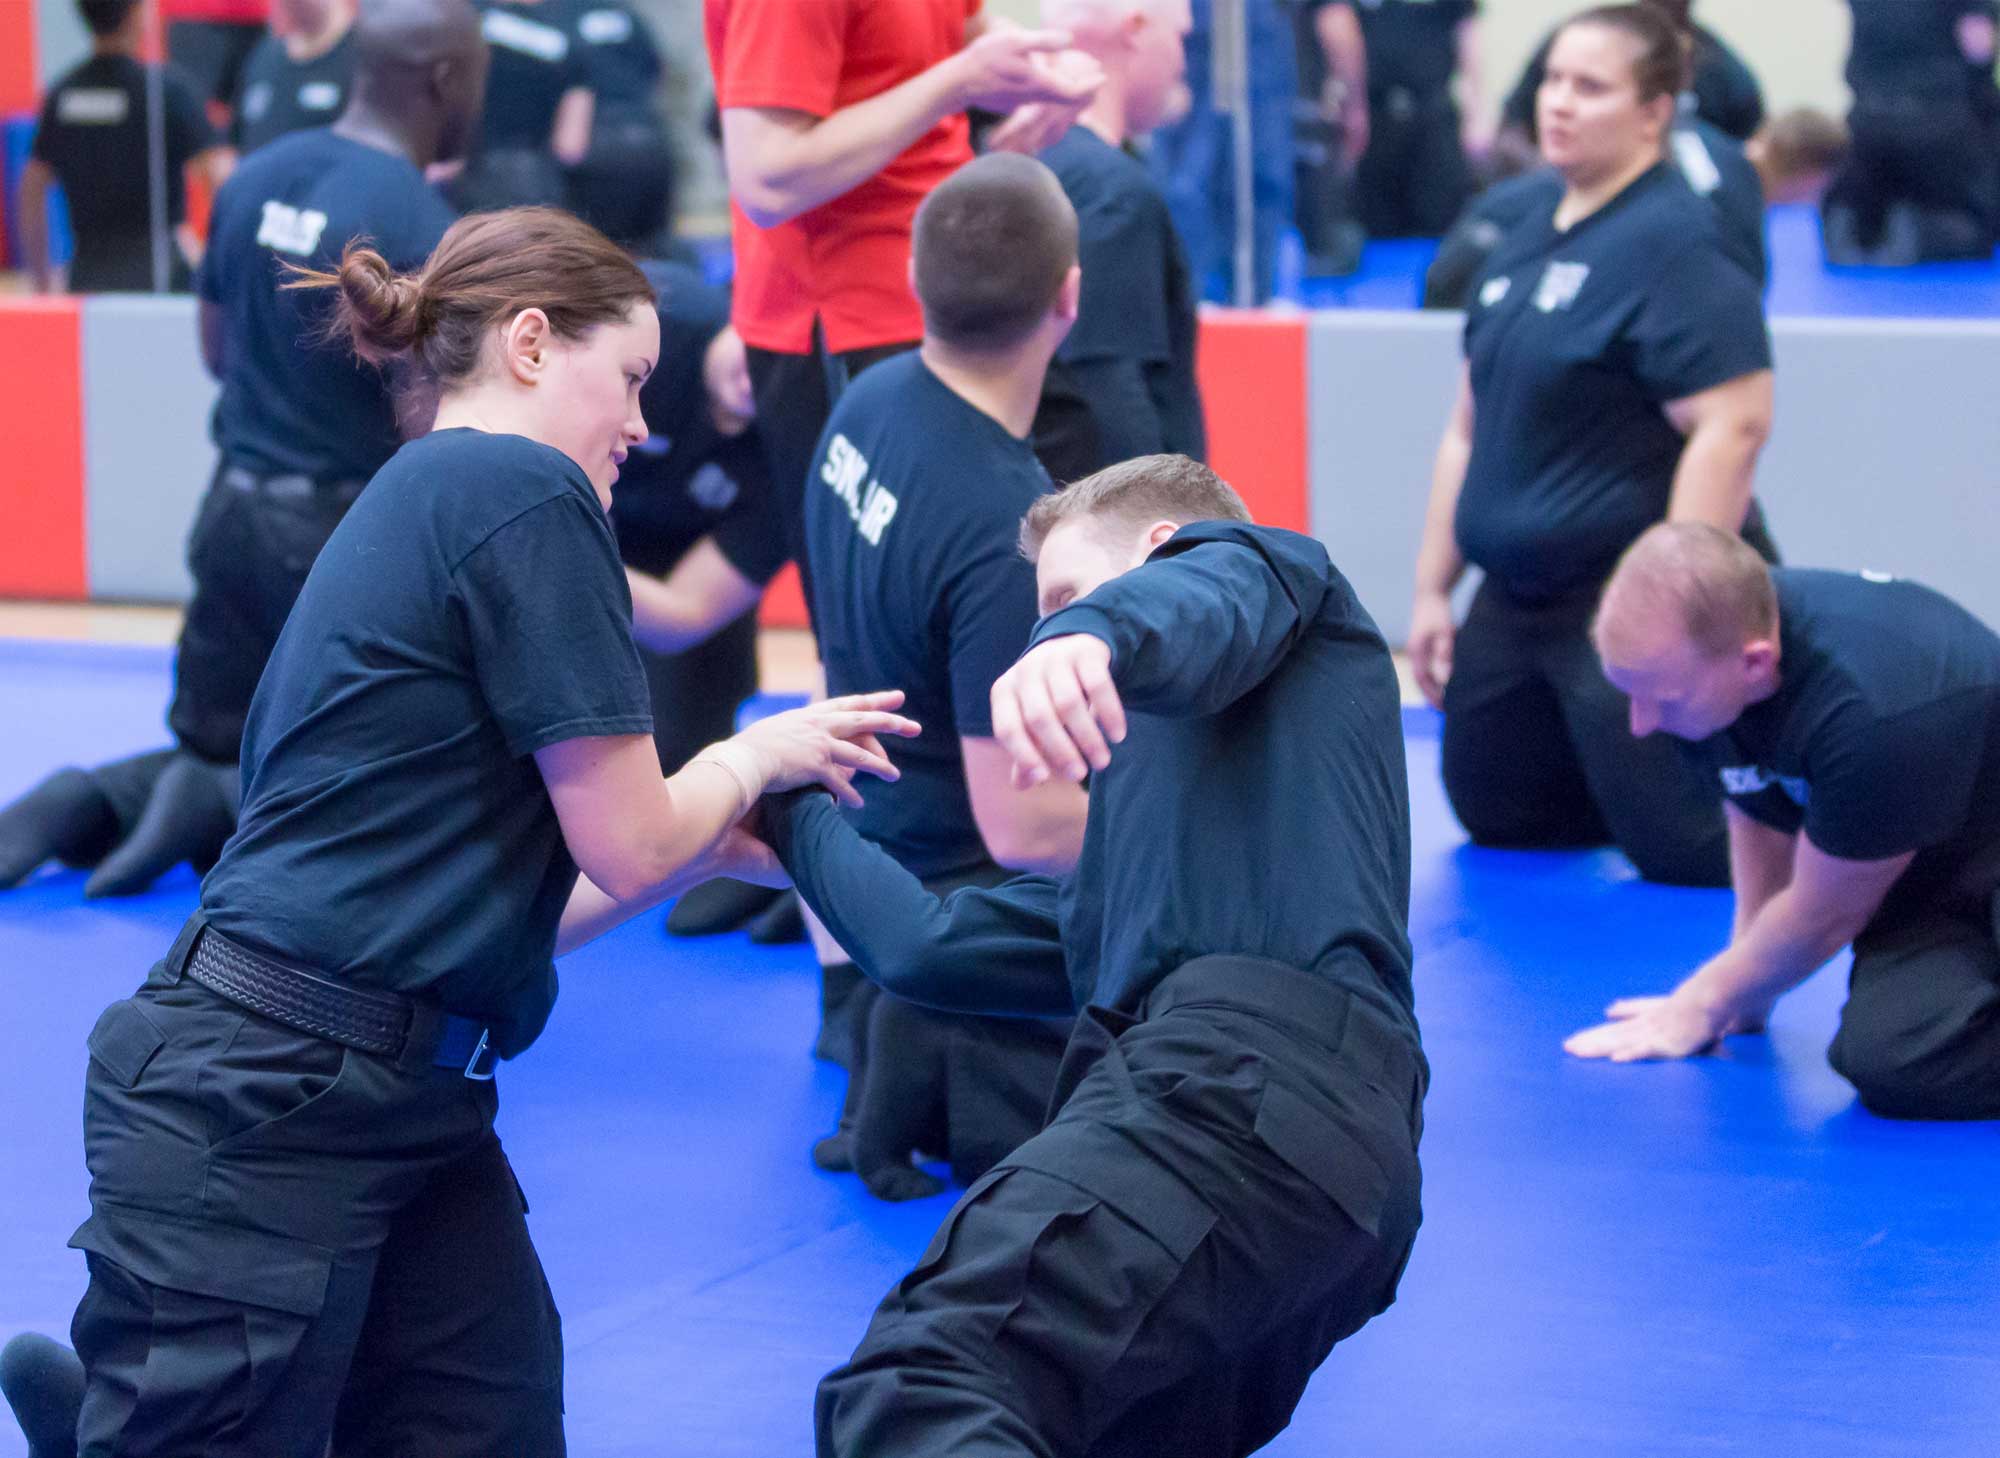 Administrative Justice students practicing hand-to-hand combat on a gym floor mat